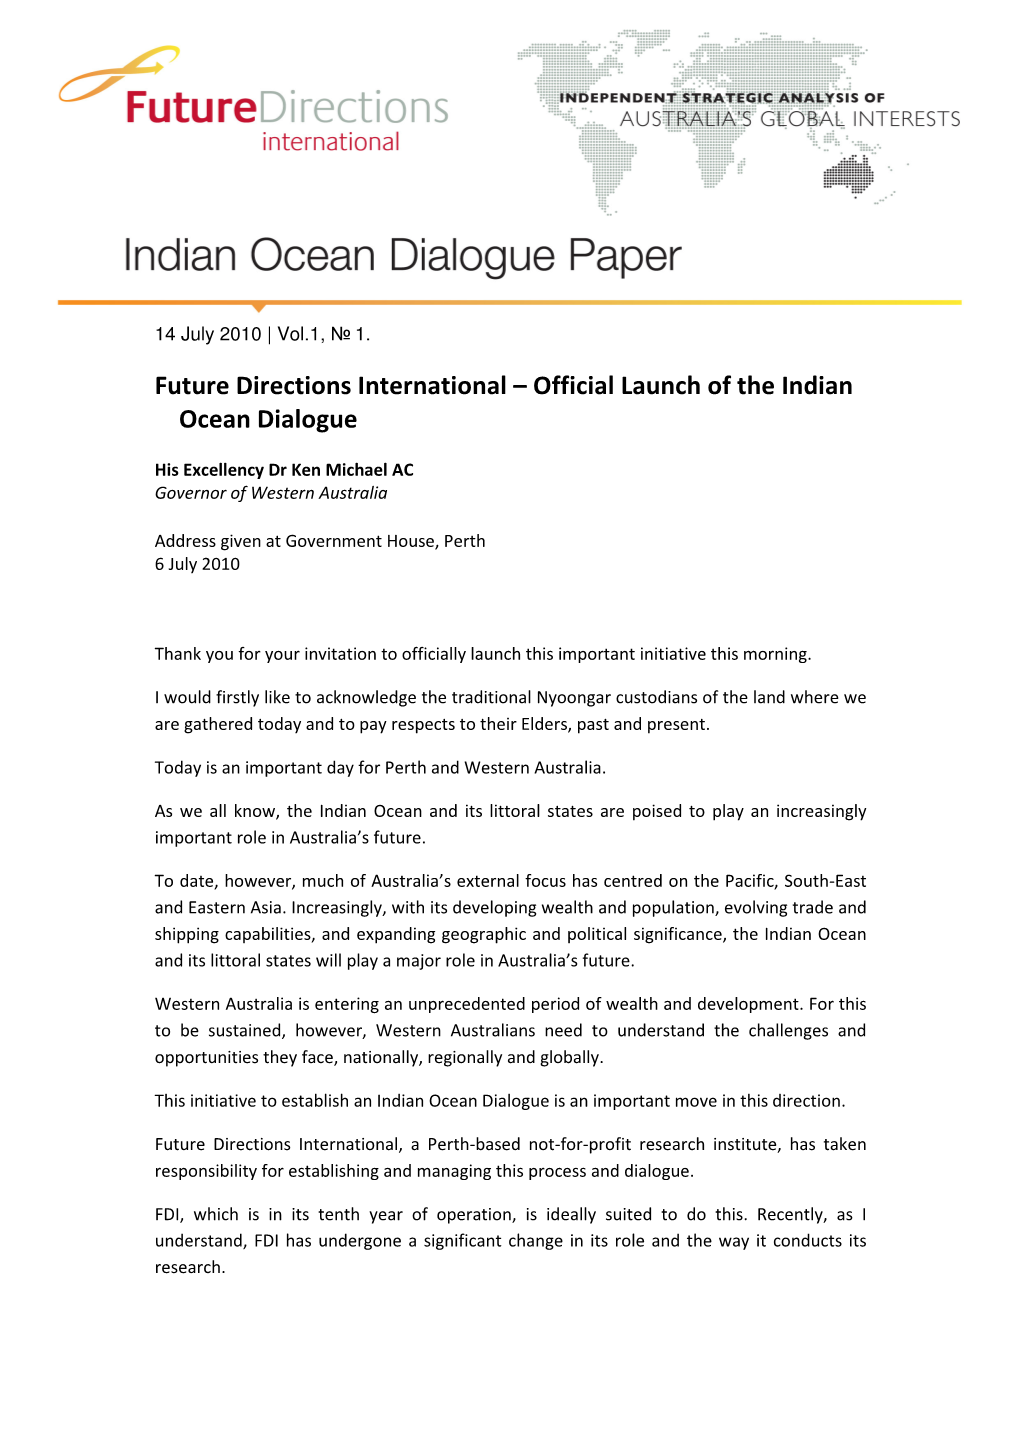 Official Launch of the Indian Ocean Dialogue